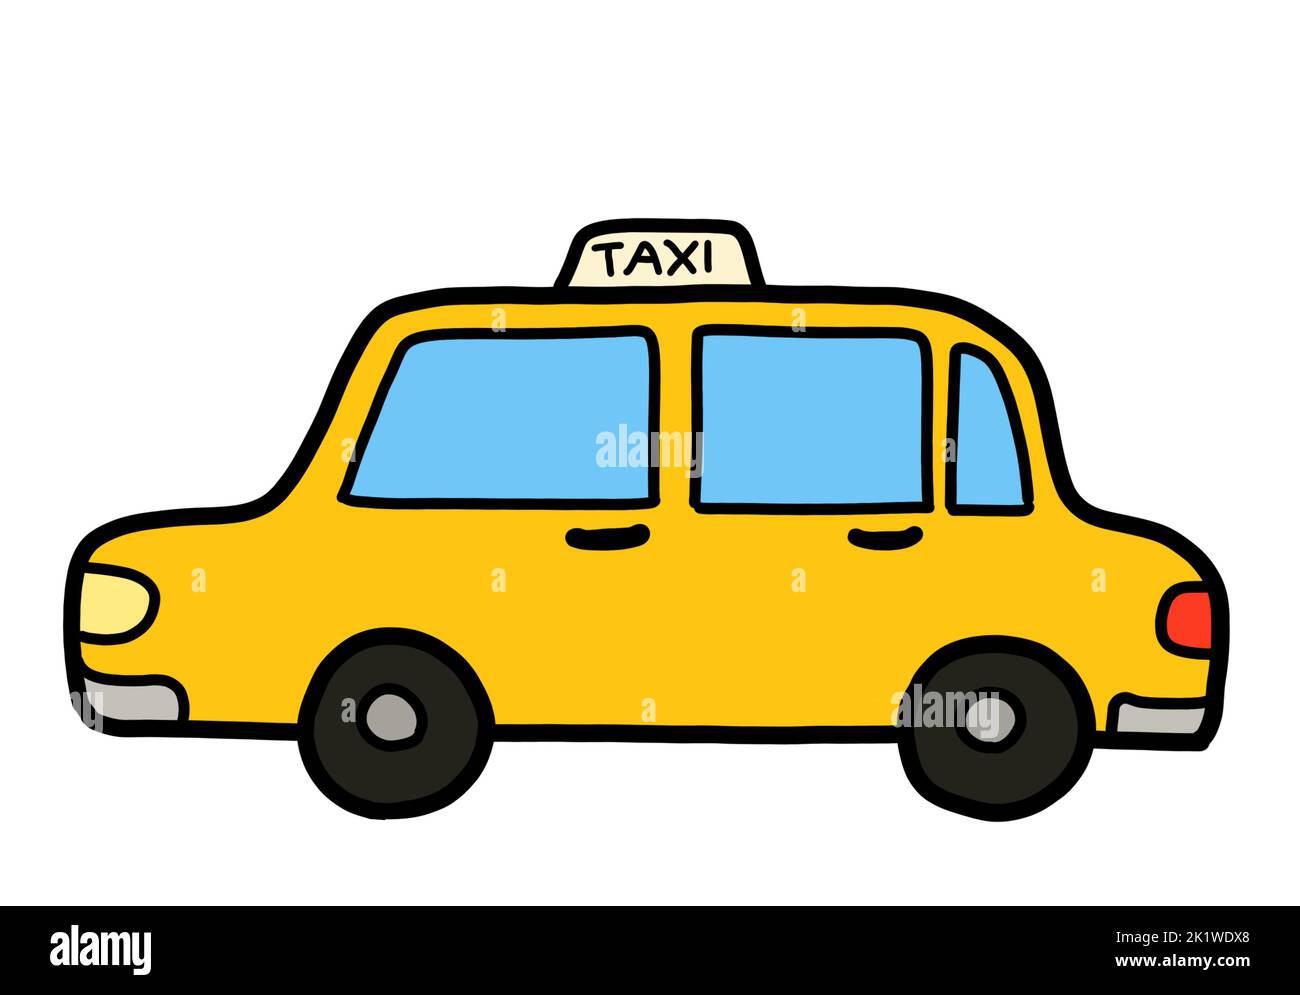 A taxi car service. Illustration drawing, isolated on white background. Stock Photo